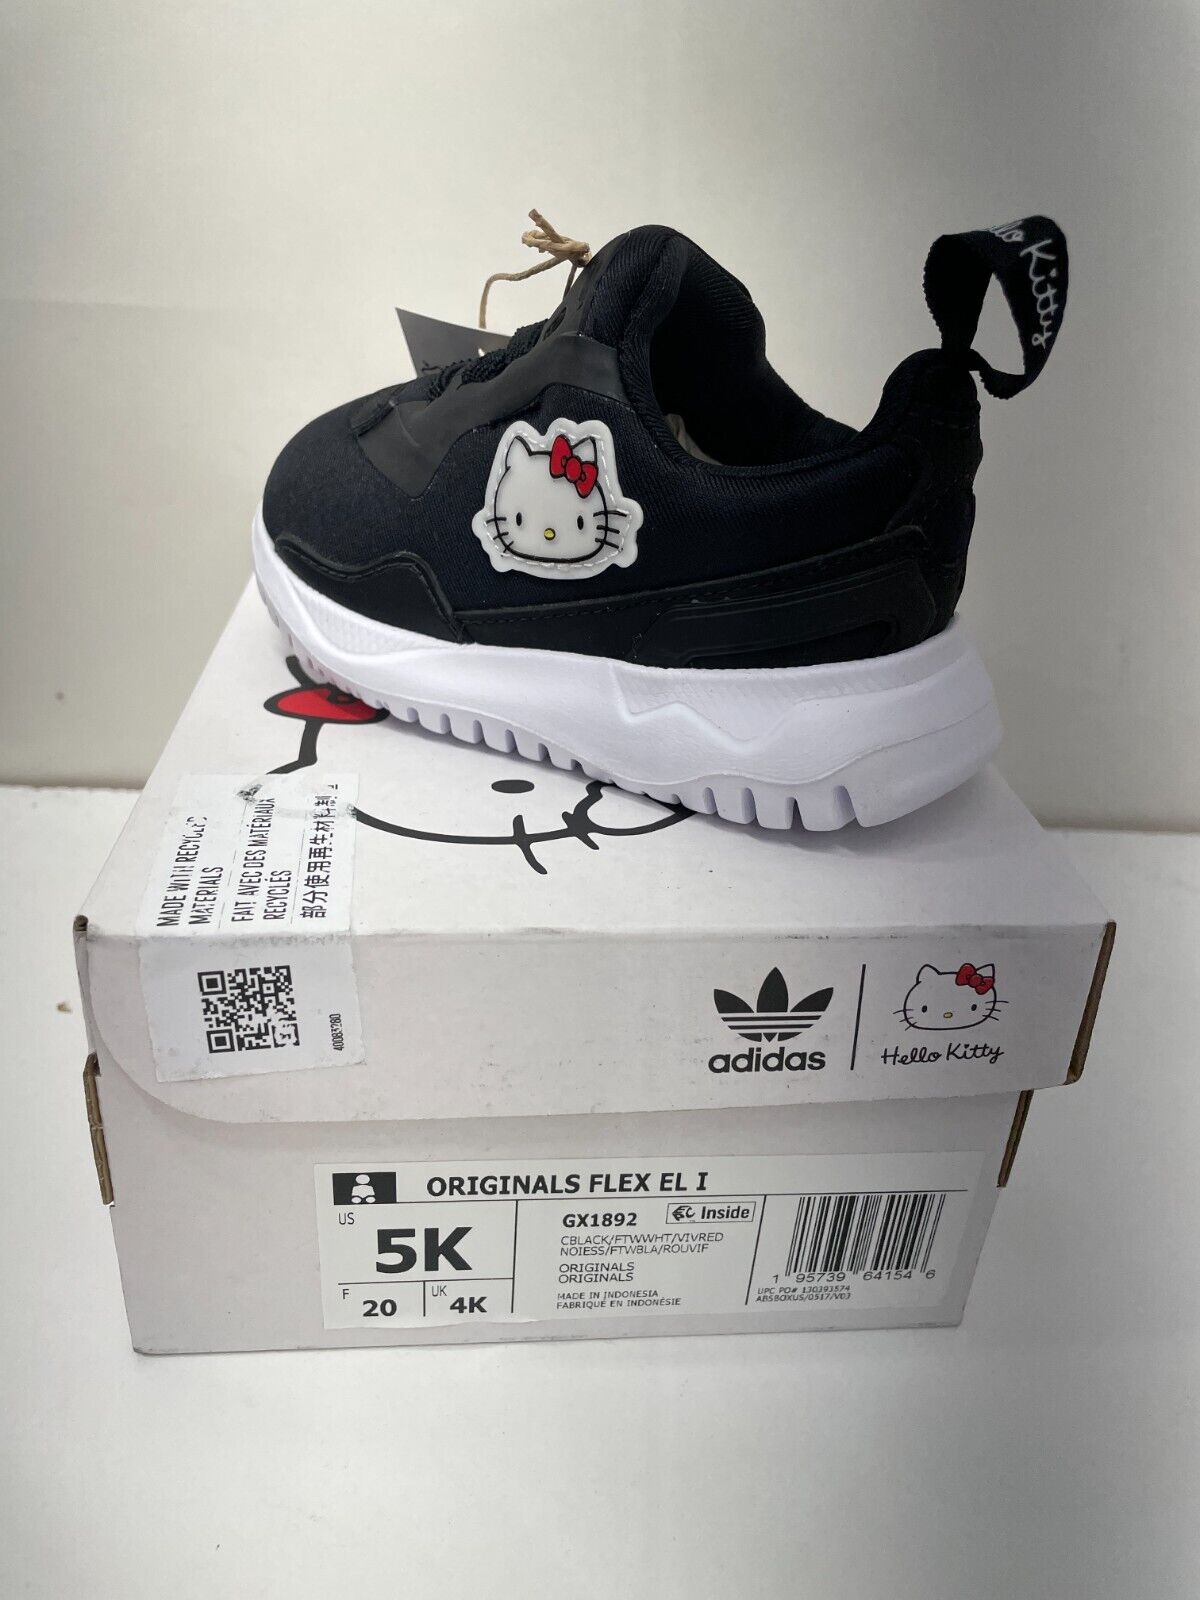 Adidas Toddlers 5K Hello Kitty Originals Flex Shoes Sneaker Black Lace Up GX1892